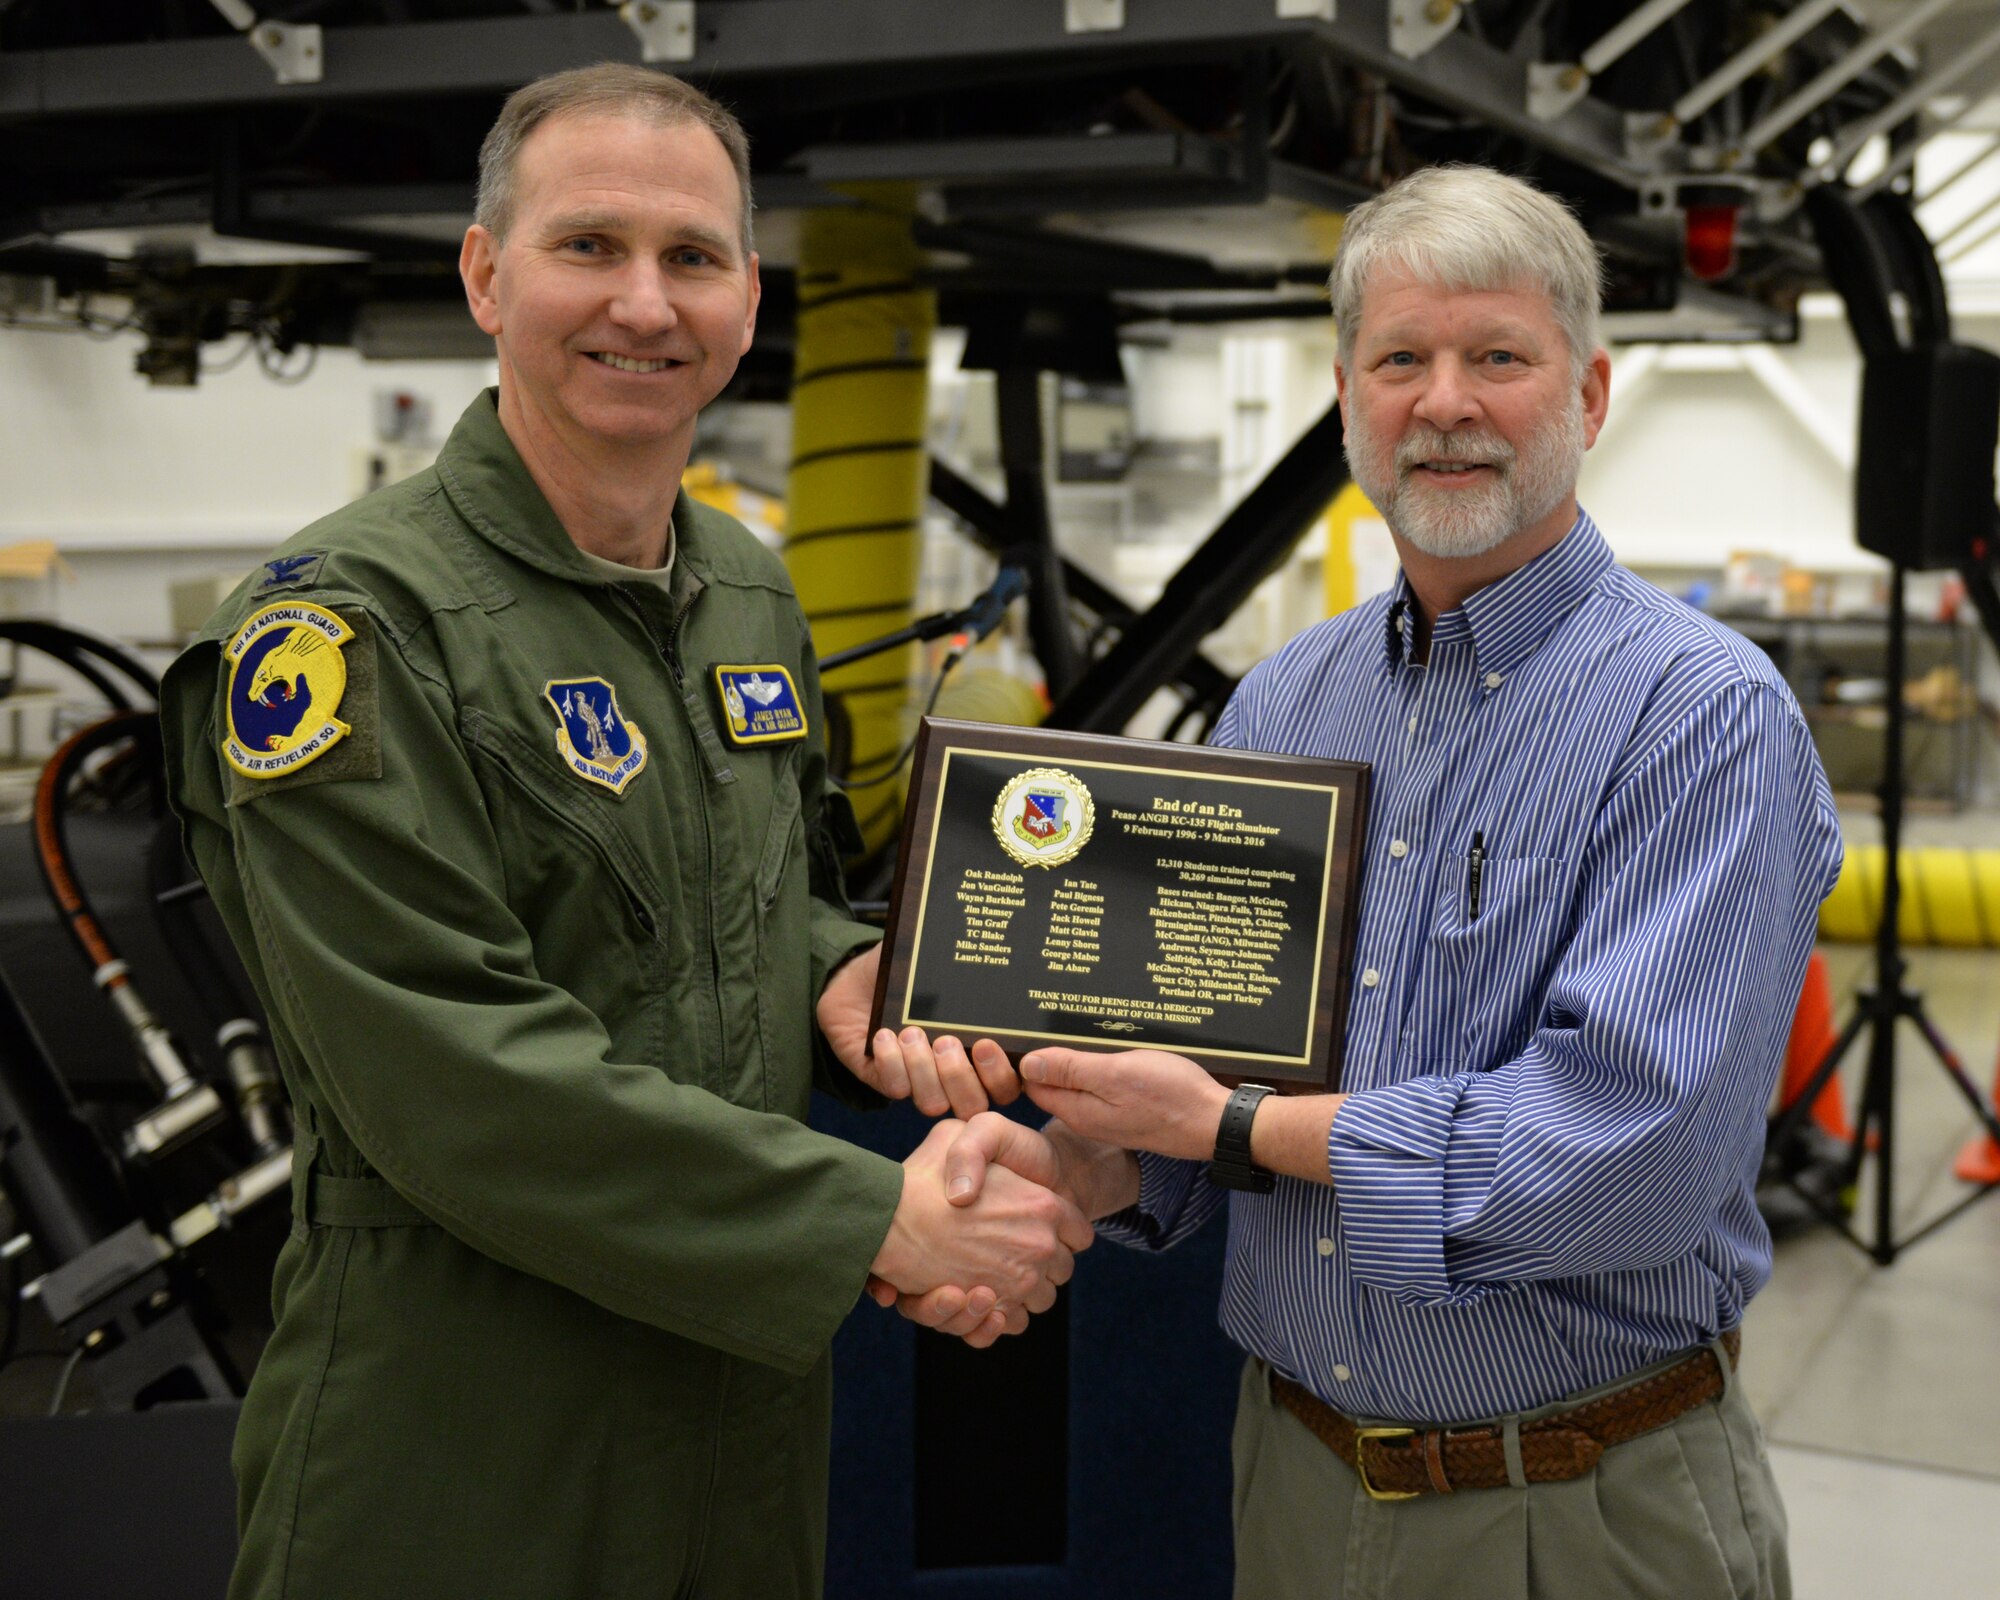 U.S. Air Force Colonel James Ryan, 157th Air Refueling Wing commander, New Hampshire Air National Guard, presents a plaque to Mr. Jon VanGuilder, regional site manager for Delaware Resource Group, during the retirement of the KC-135 flight simulator, Pease Air National Guard Base, New Hampshire, March, 9, 2016. DRG supports the daily operation of the simulator.  The simulator is being retired to make way for a new KC-46 weapons trainer slated to arrive in the spring of 2017. (U.S. Air National Guard photo by Staff Sgt. Curtis J. Lenz)